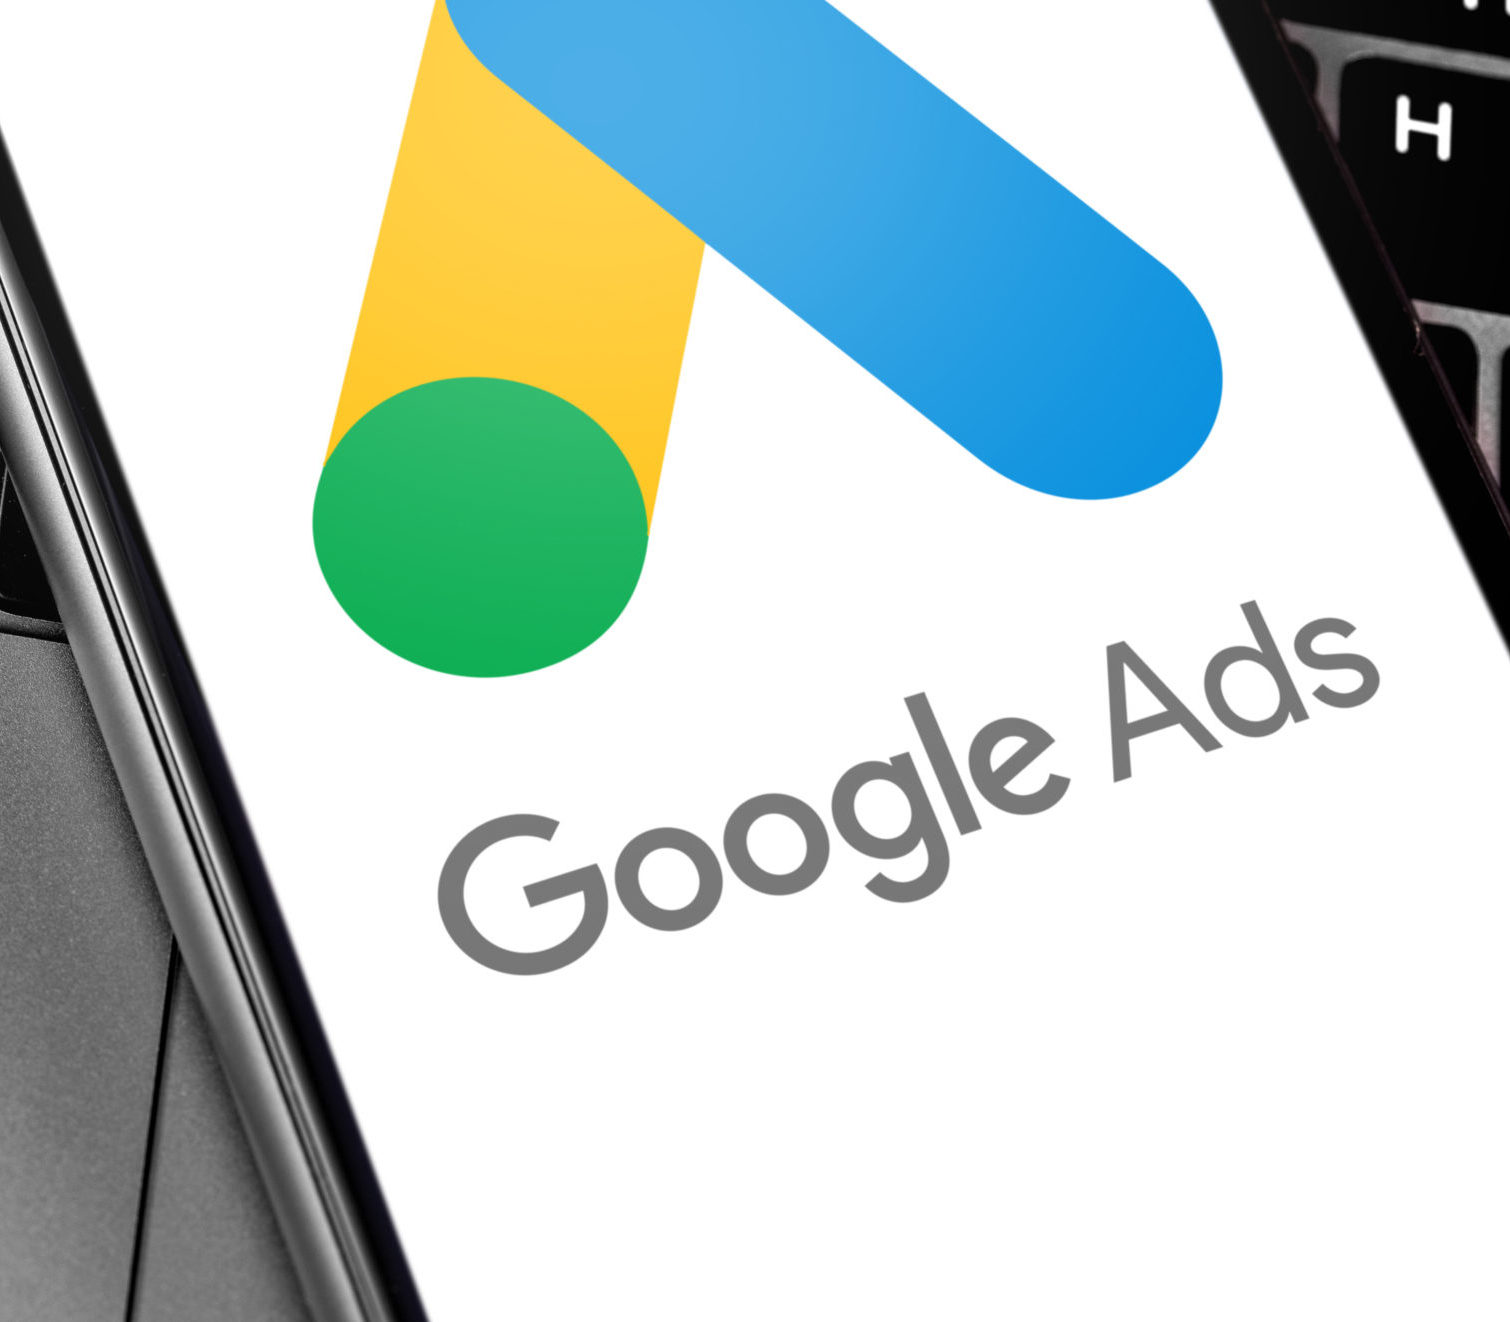 Google Ads Announce $340M in Ad Credits for Small and Medium-Sized Business